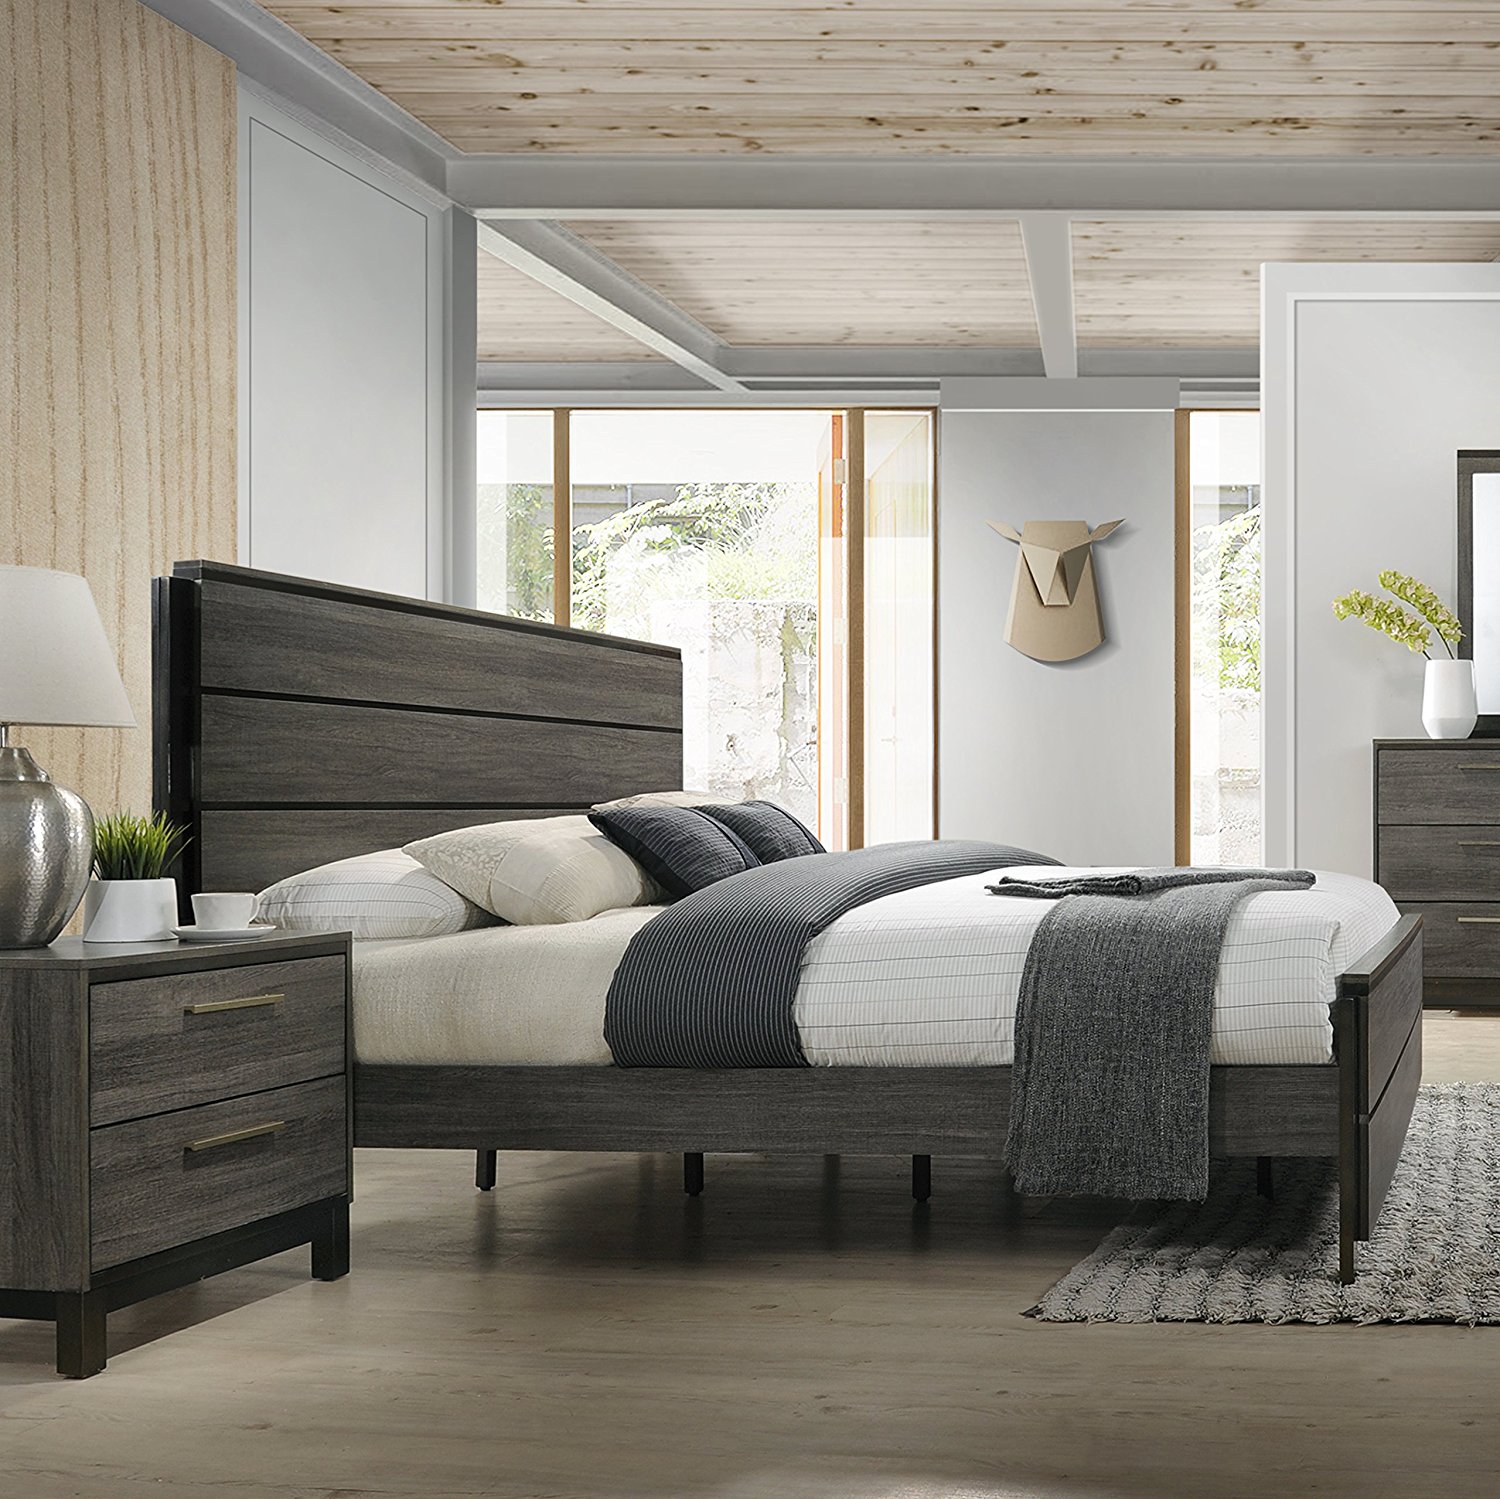 Roundhill Furniture Ioana 187 Antique Grey Finish Wood Queen Size Bed